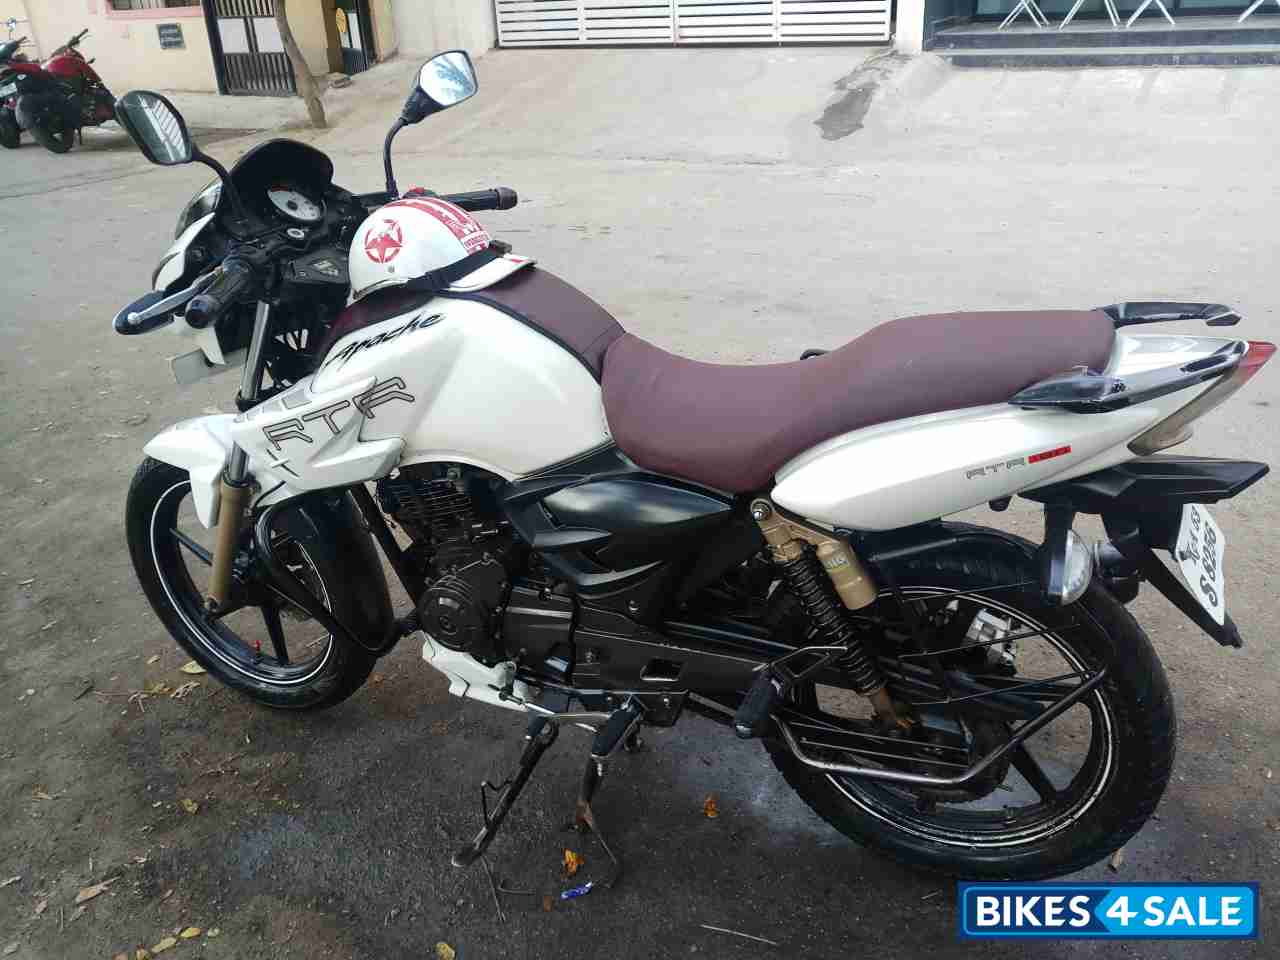 Used 2011 model TVS Apache RTR 180 for sale in Bangalore ...